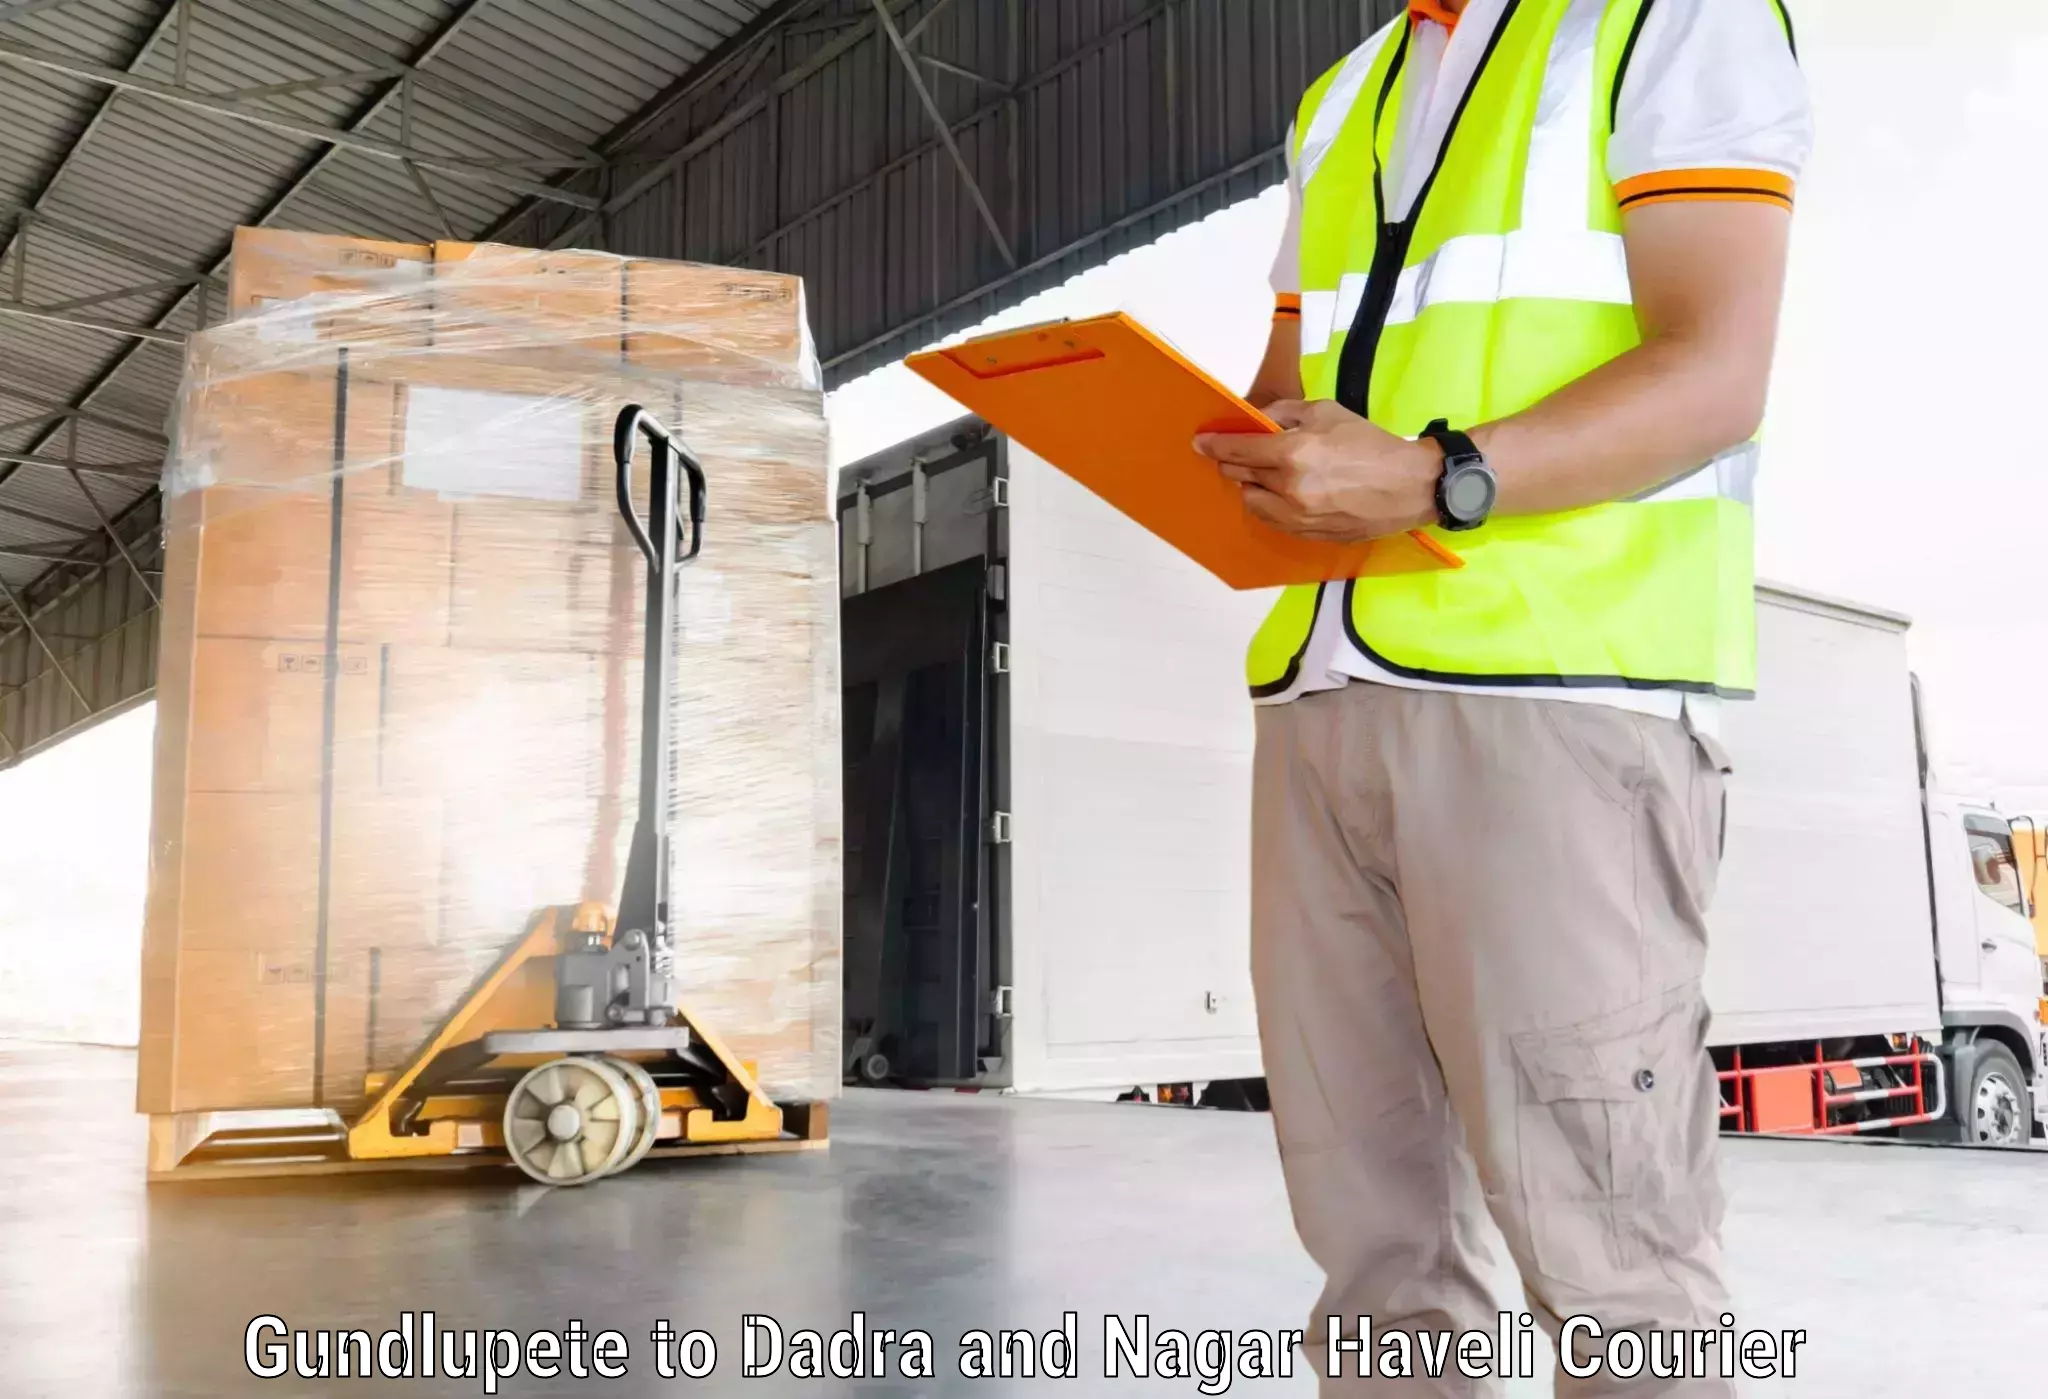 Reliable logistics providers in Gundlupete to Dadra and Nagar Haveli